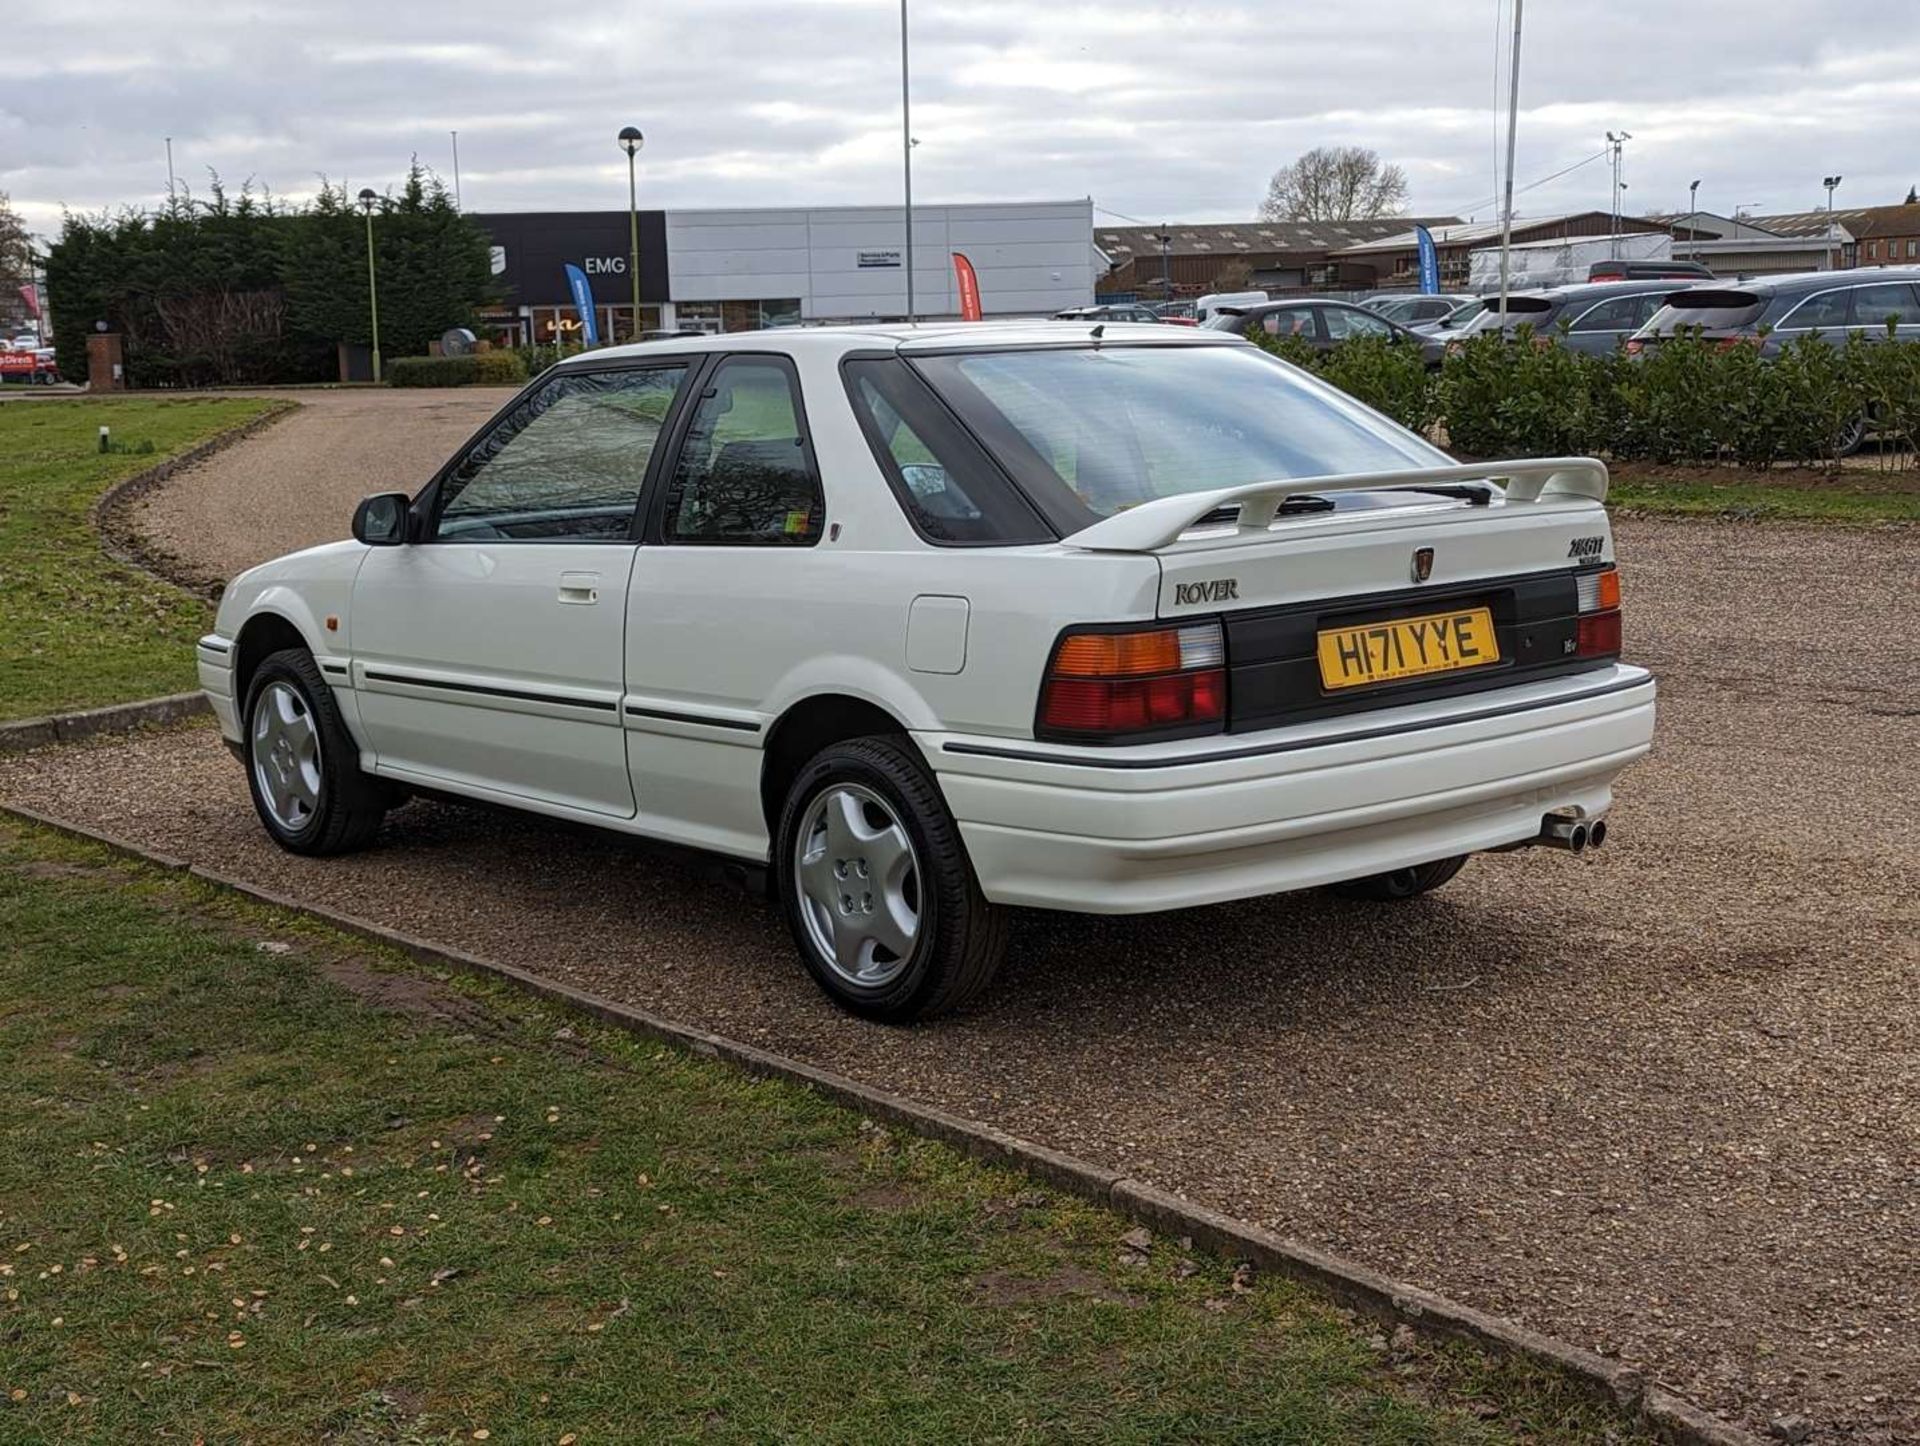 1991 ROVER 216 GTI TWIN CAM - Image 5 of 27